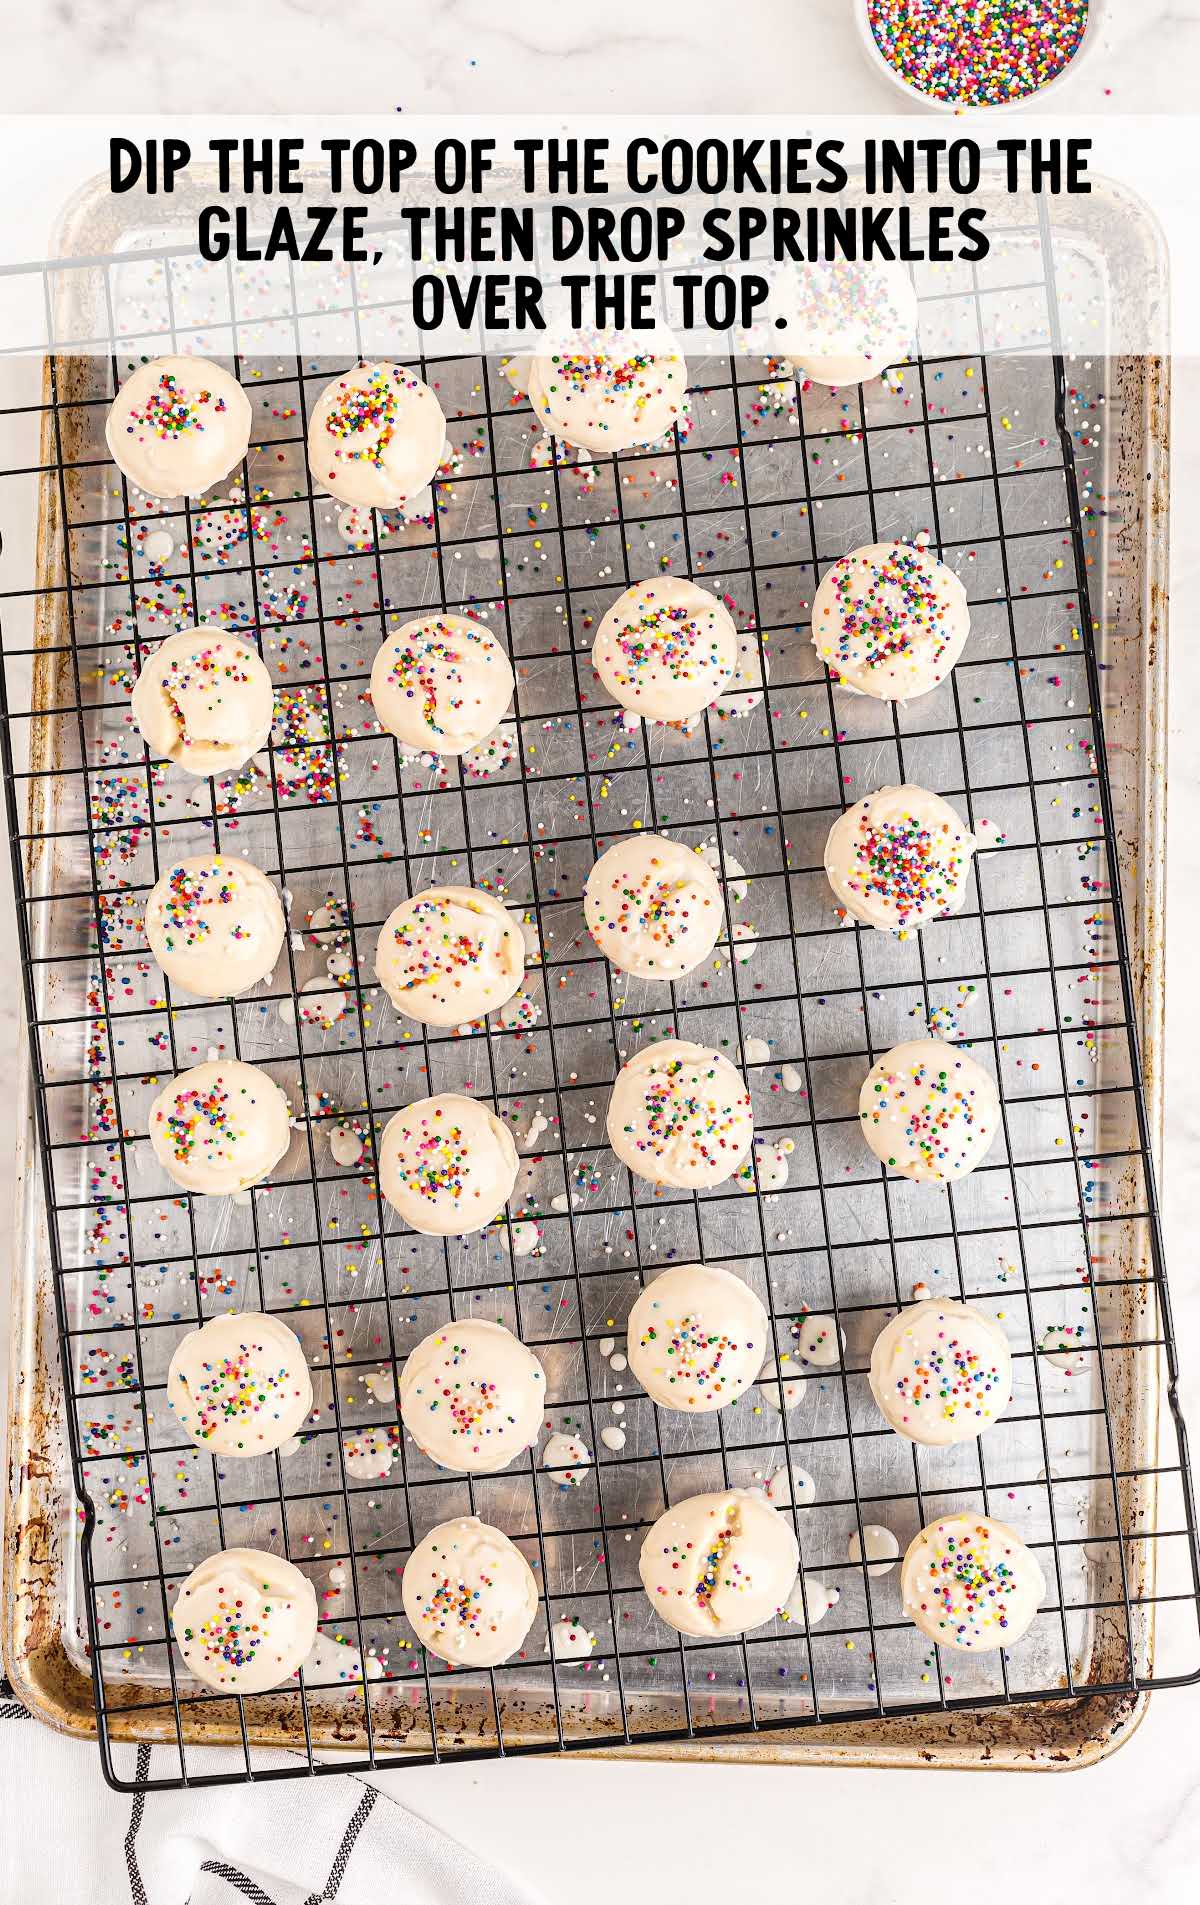 Italian Cookies process shot of the top of the cookies dipped in glaze and topped with sprinkles